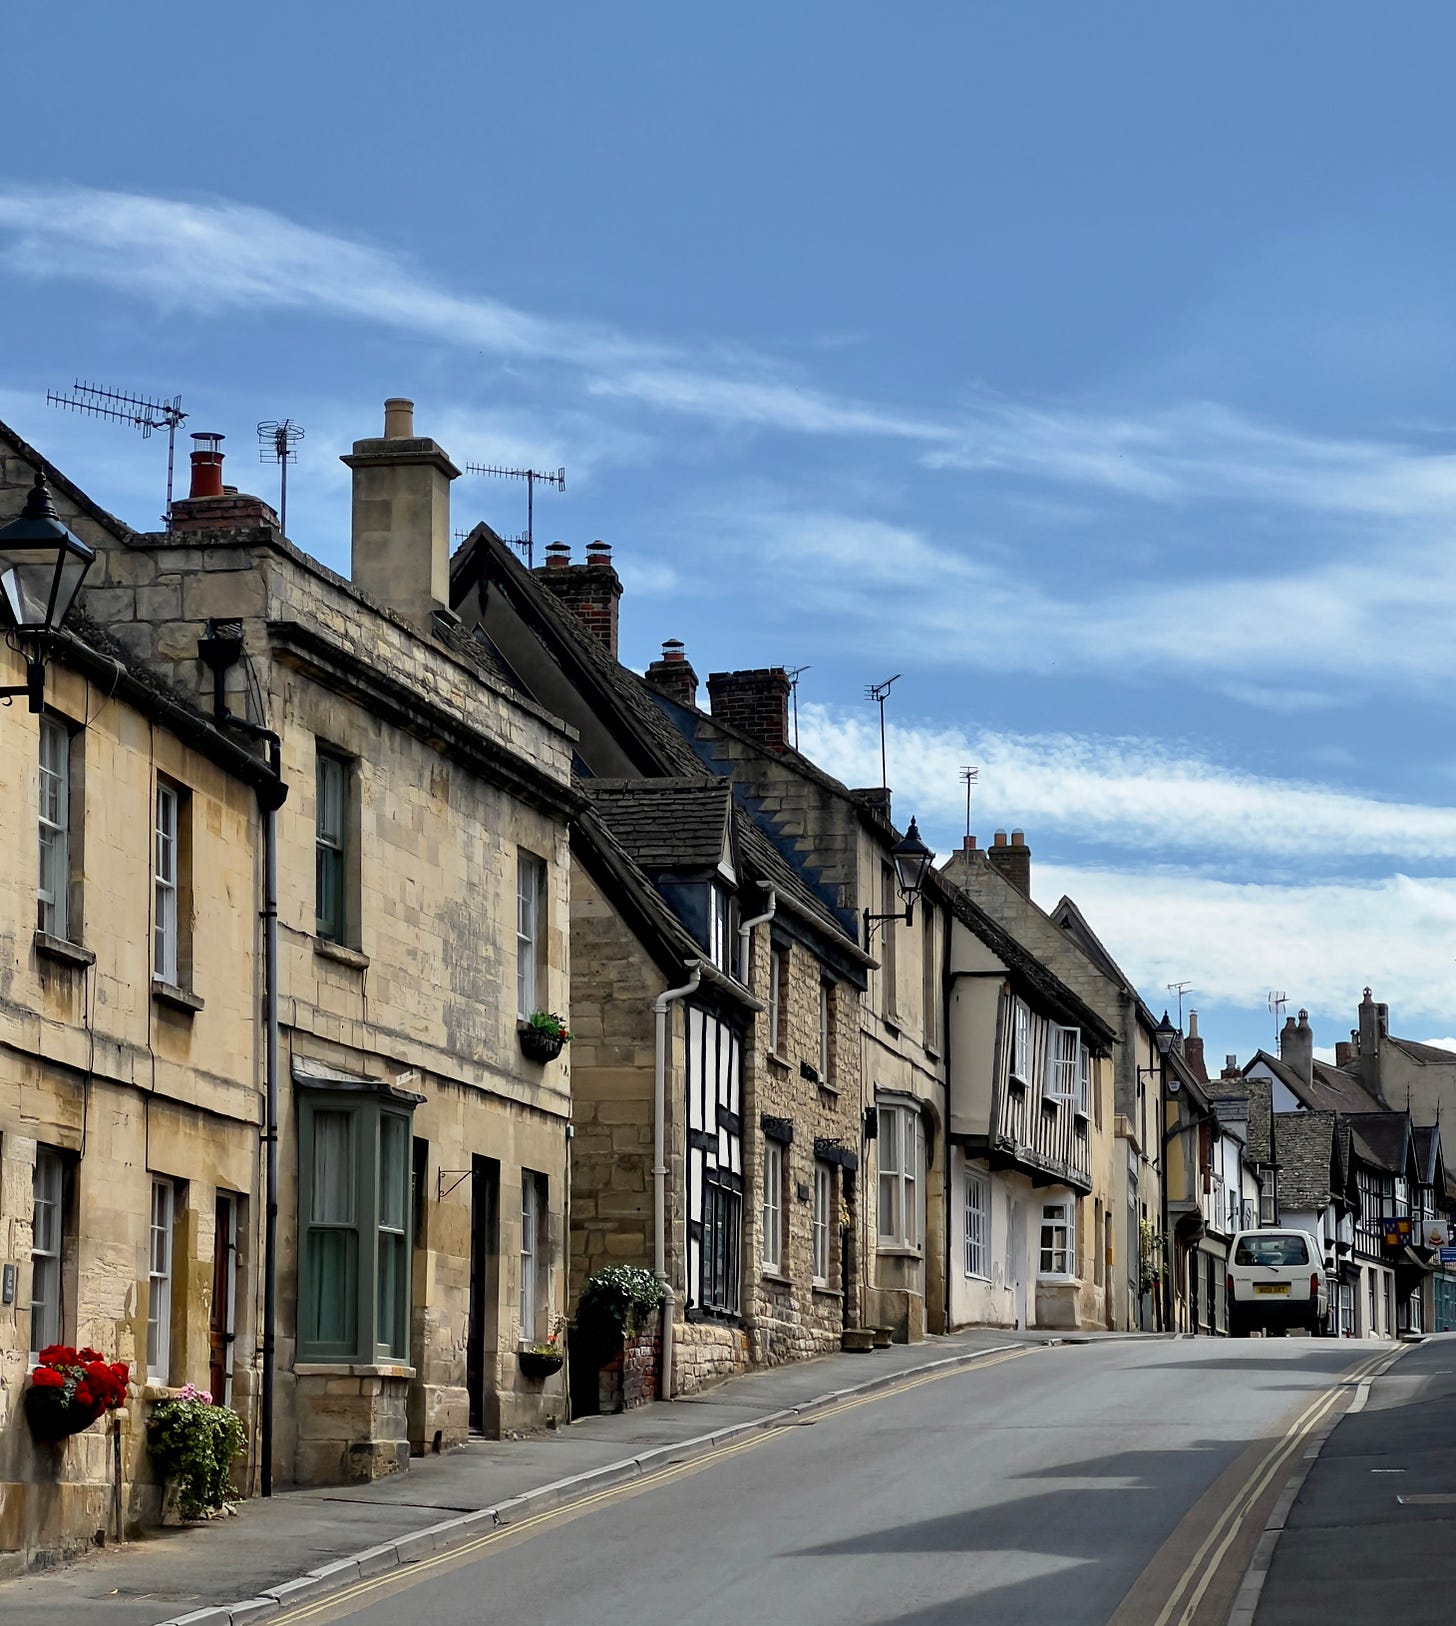 Street scene from Winchcombe, England with yellow stone buildings, red geraniums  in a window box and a blue sky with white clouds